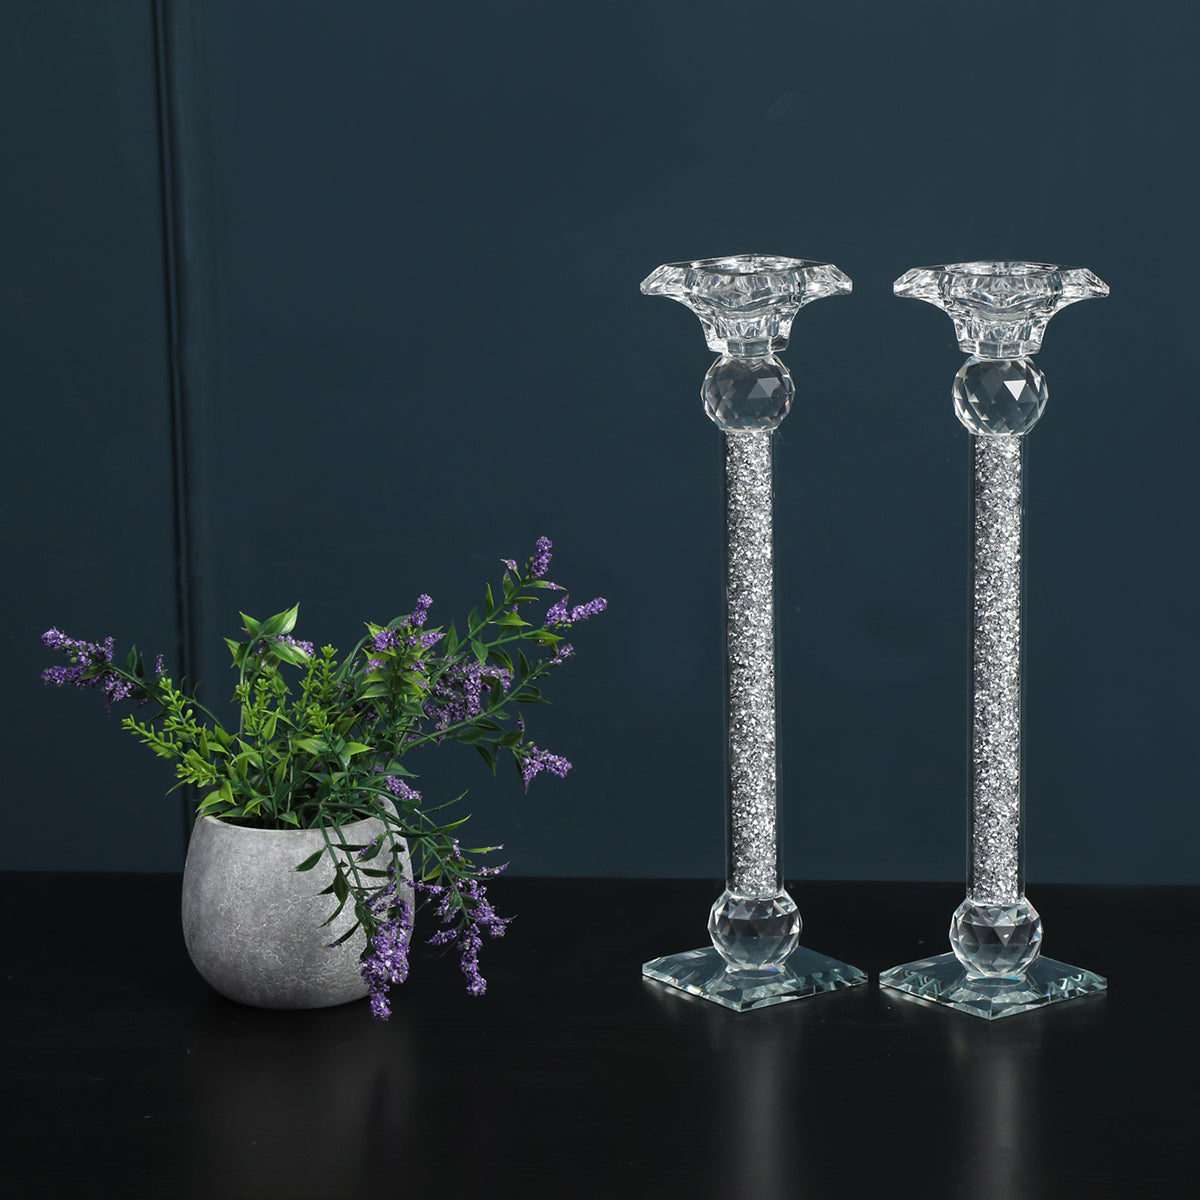 Ambrose Exquisite 2 Piece Candle Holders in Silver silver-glass